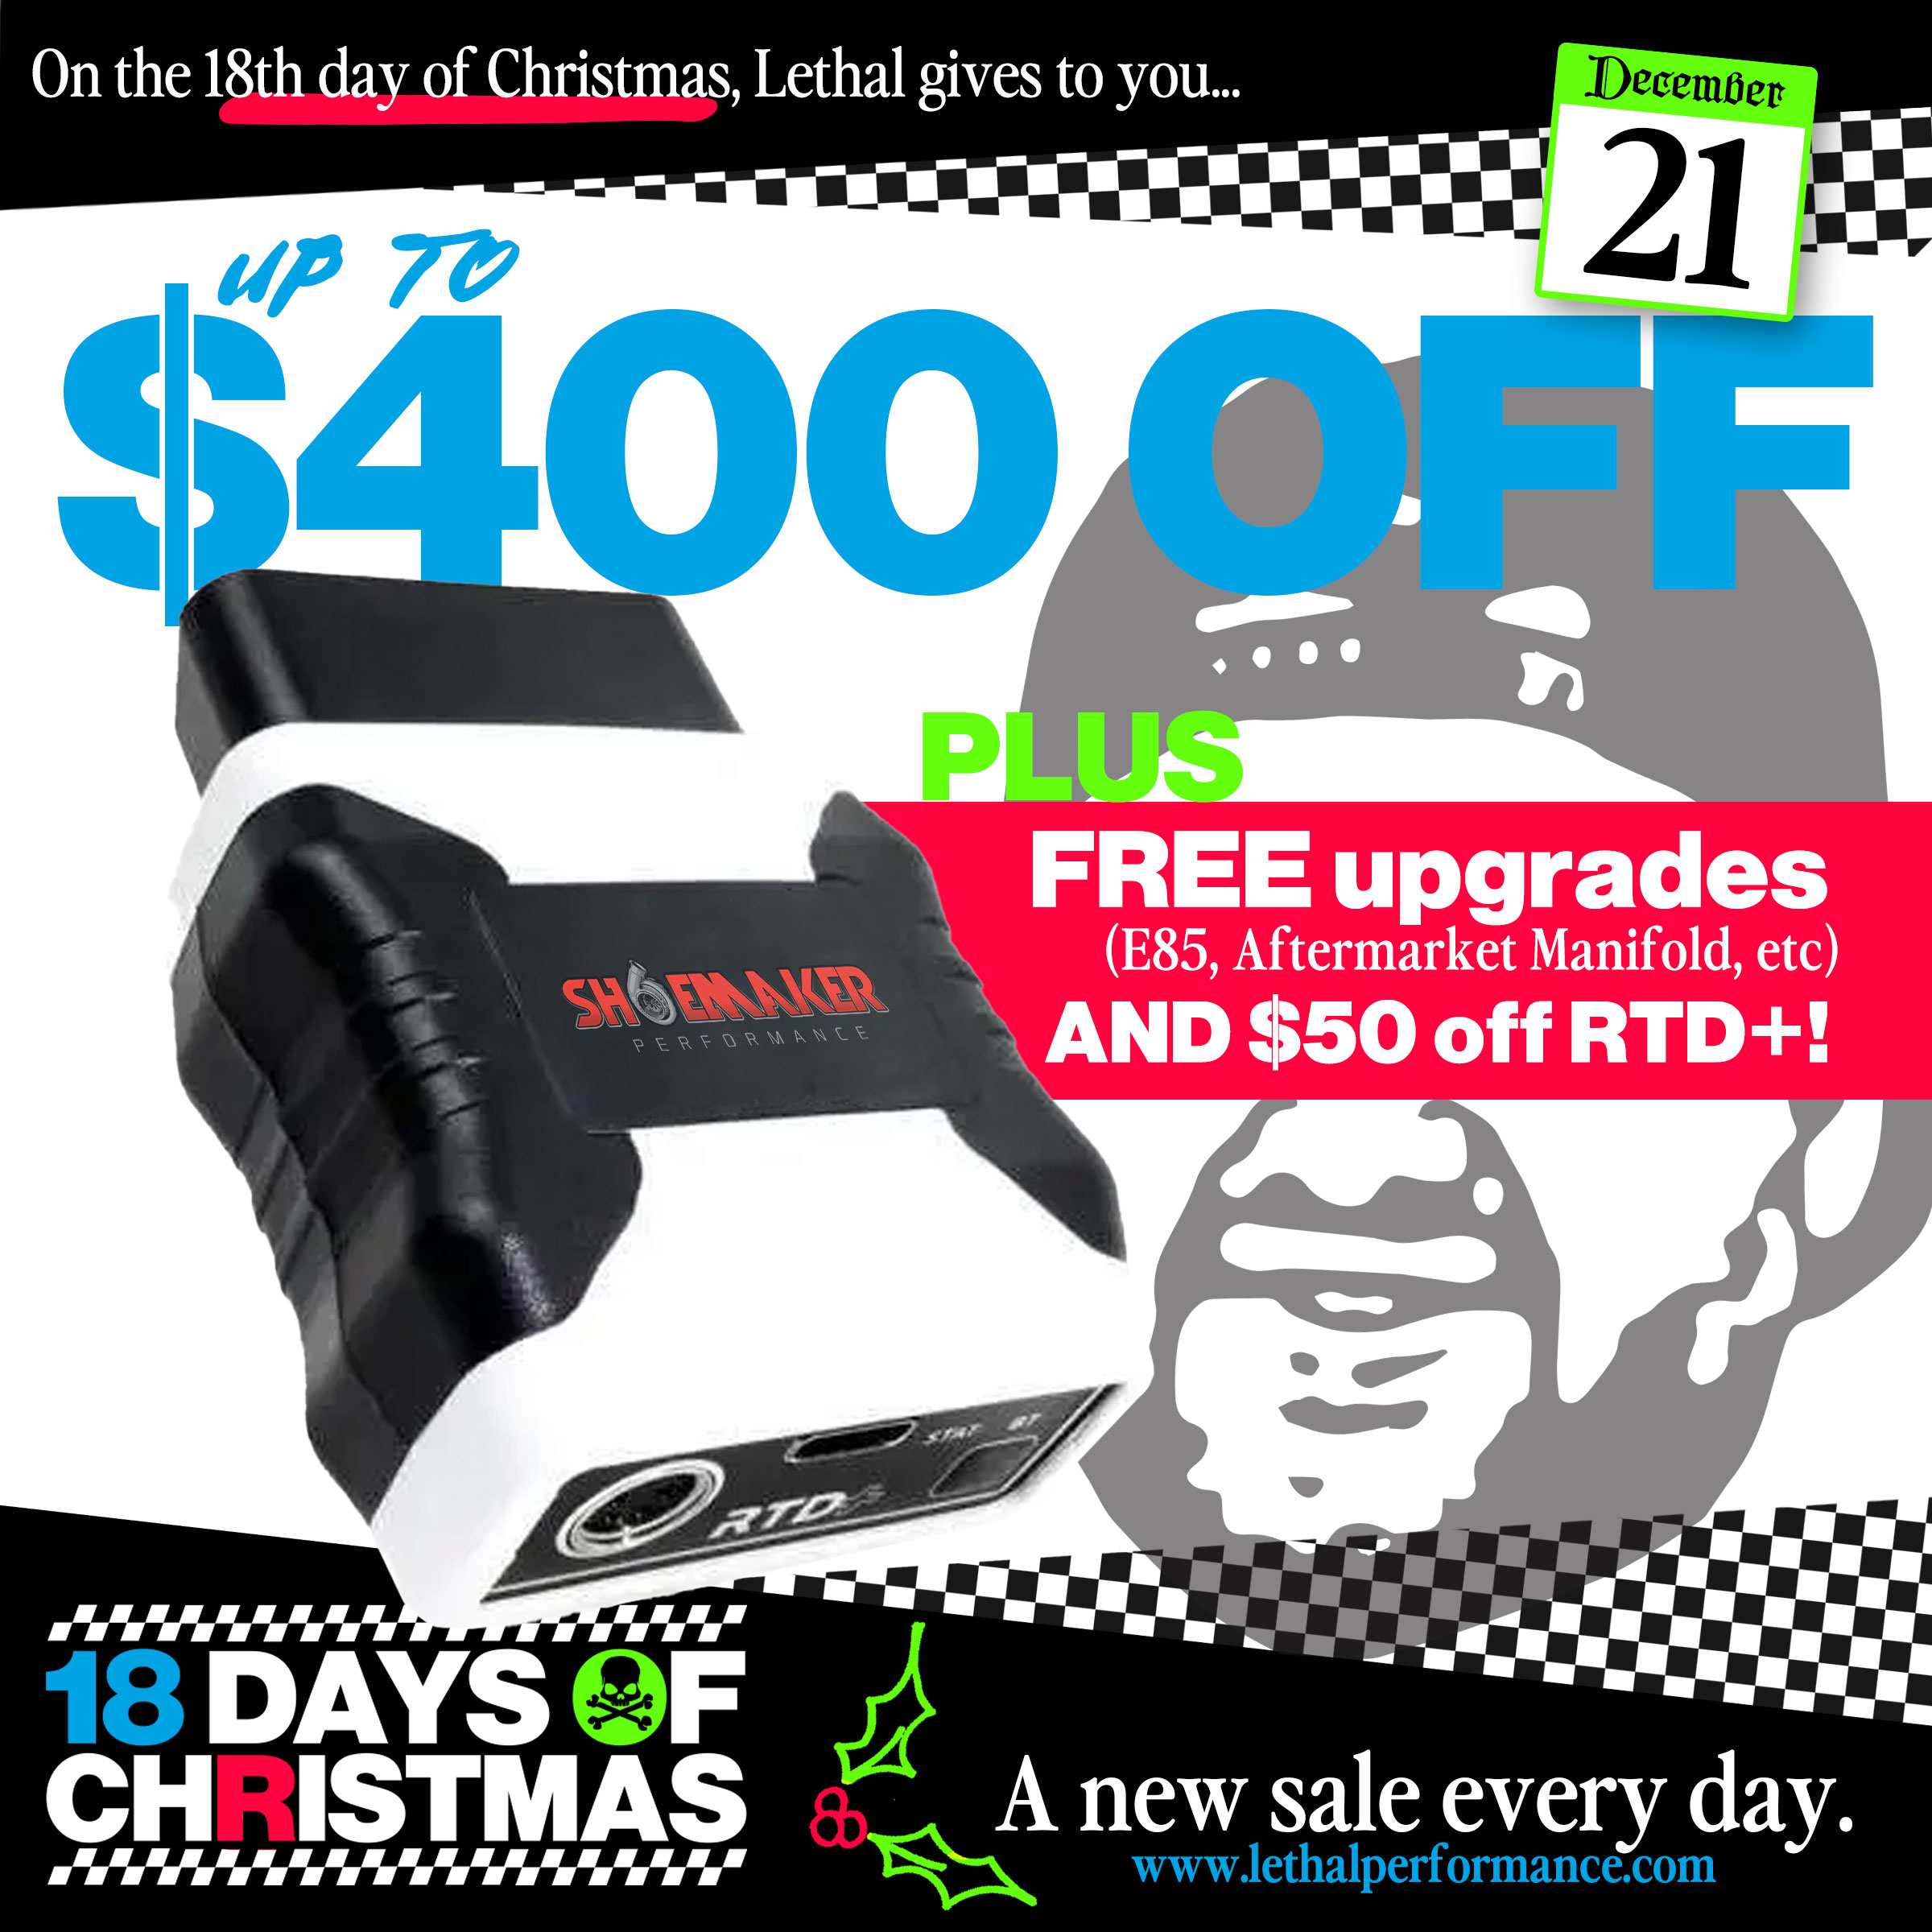 S650 Mustang Lethal Perfomance's 18 Days of Christmas SALES START NOW!! Shoemaker (2)